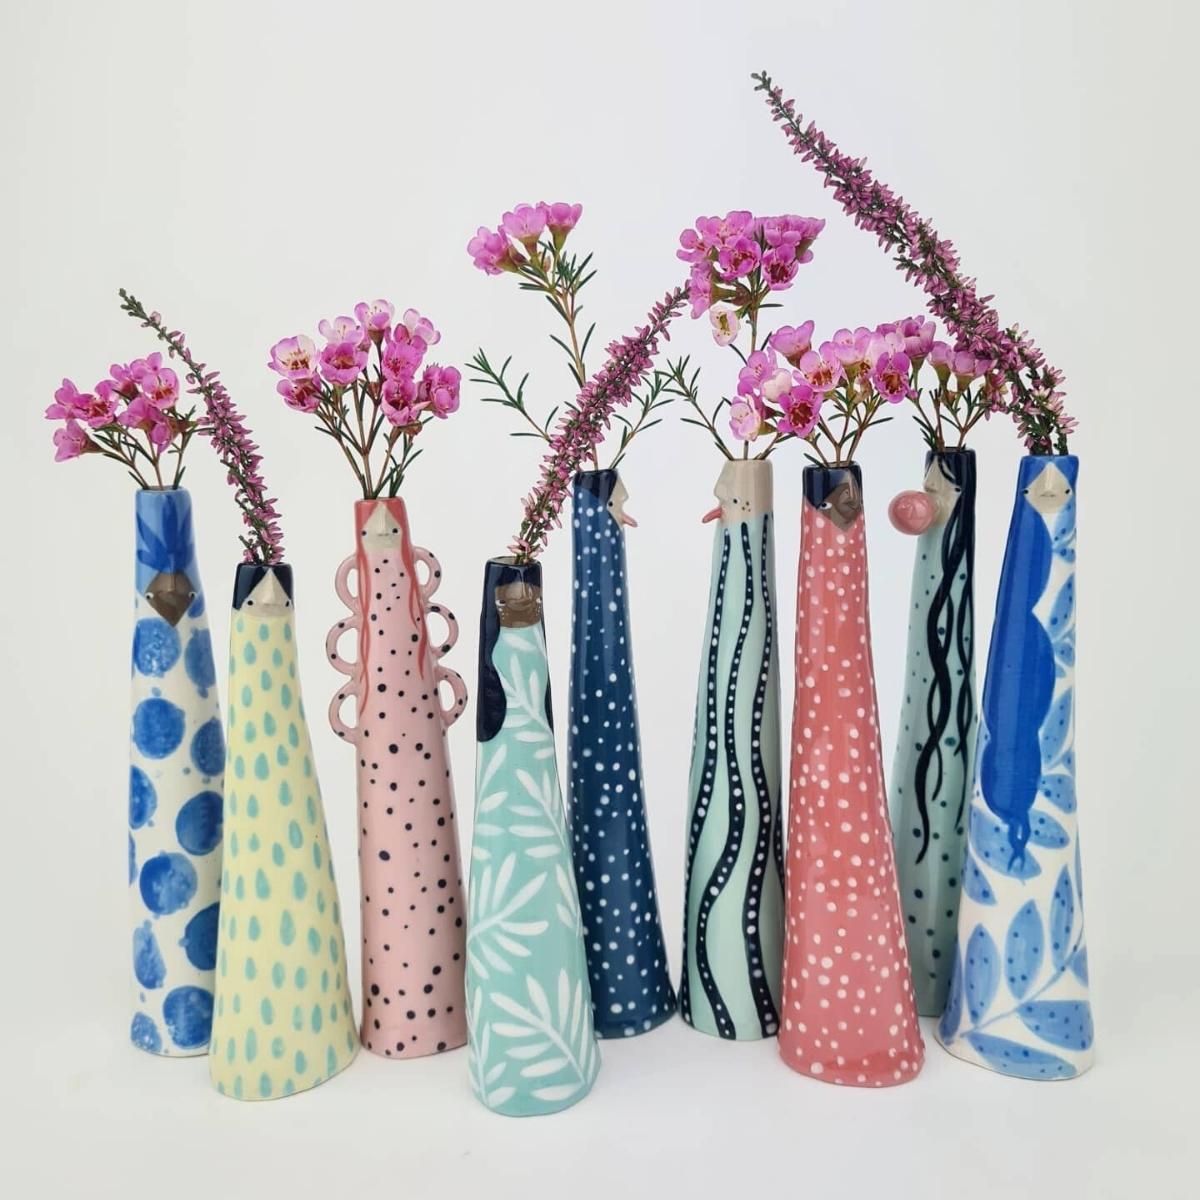 Thursd Feature Quirky Faces and Patterns Adorn Sandra Apperloo's Bud Vases